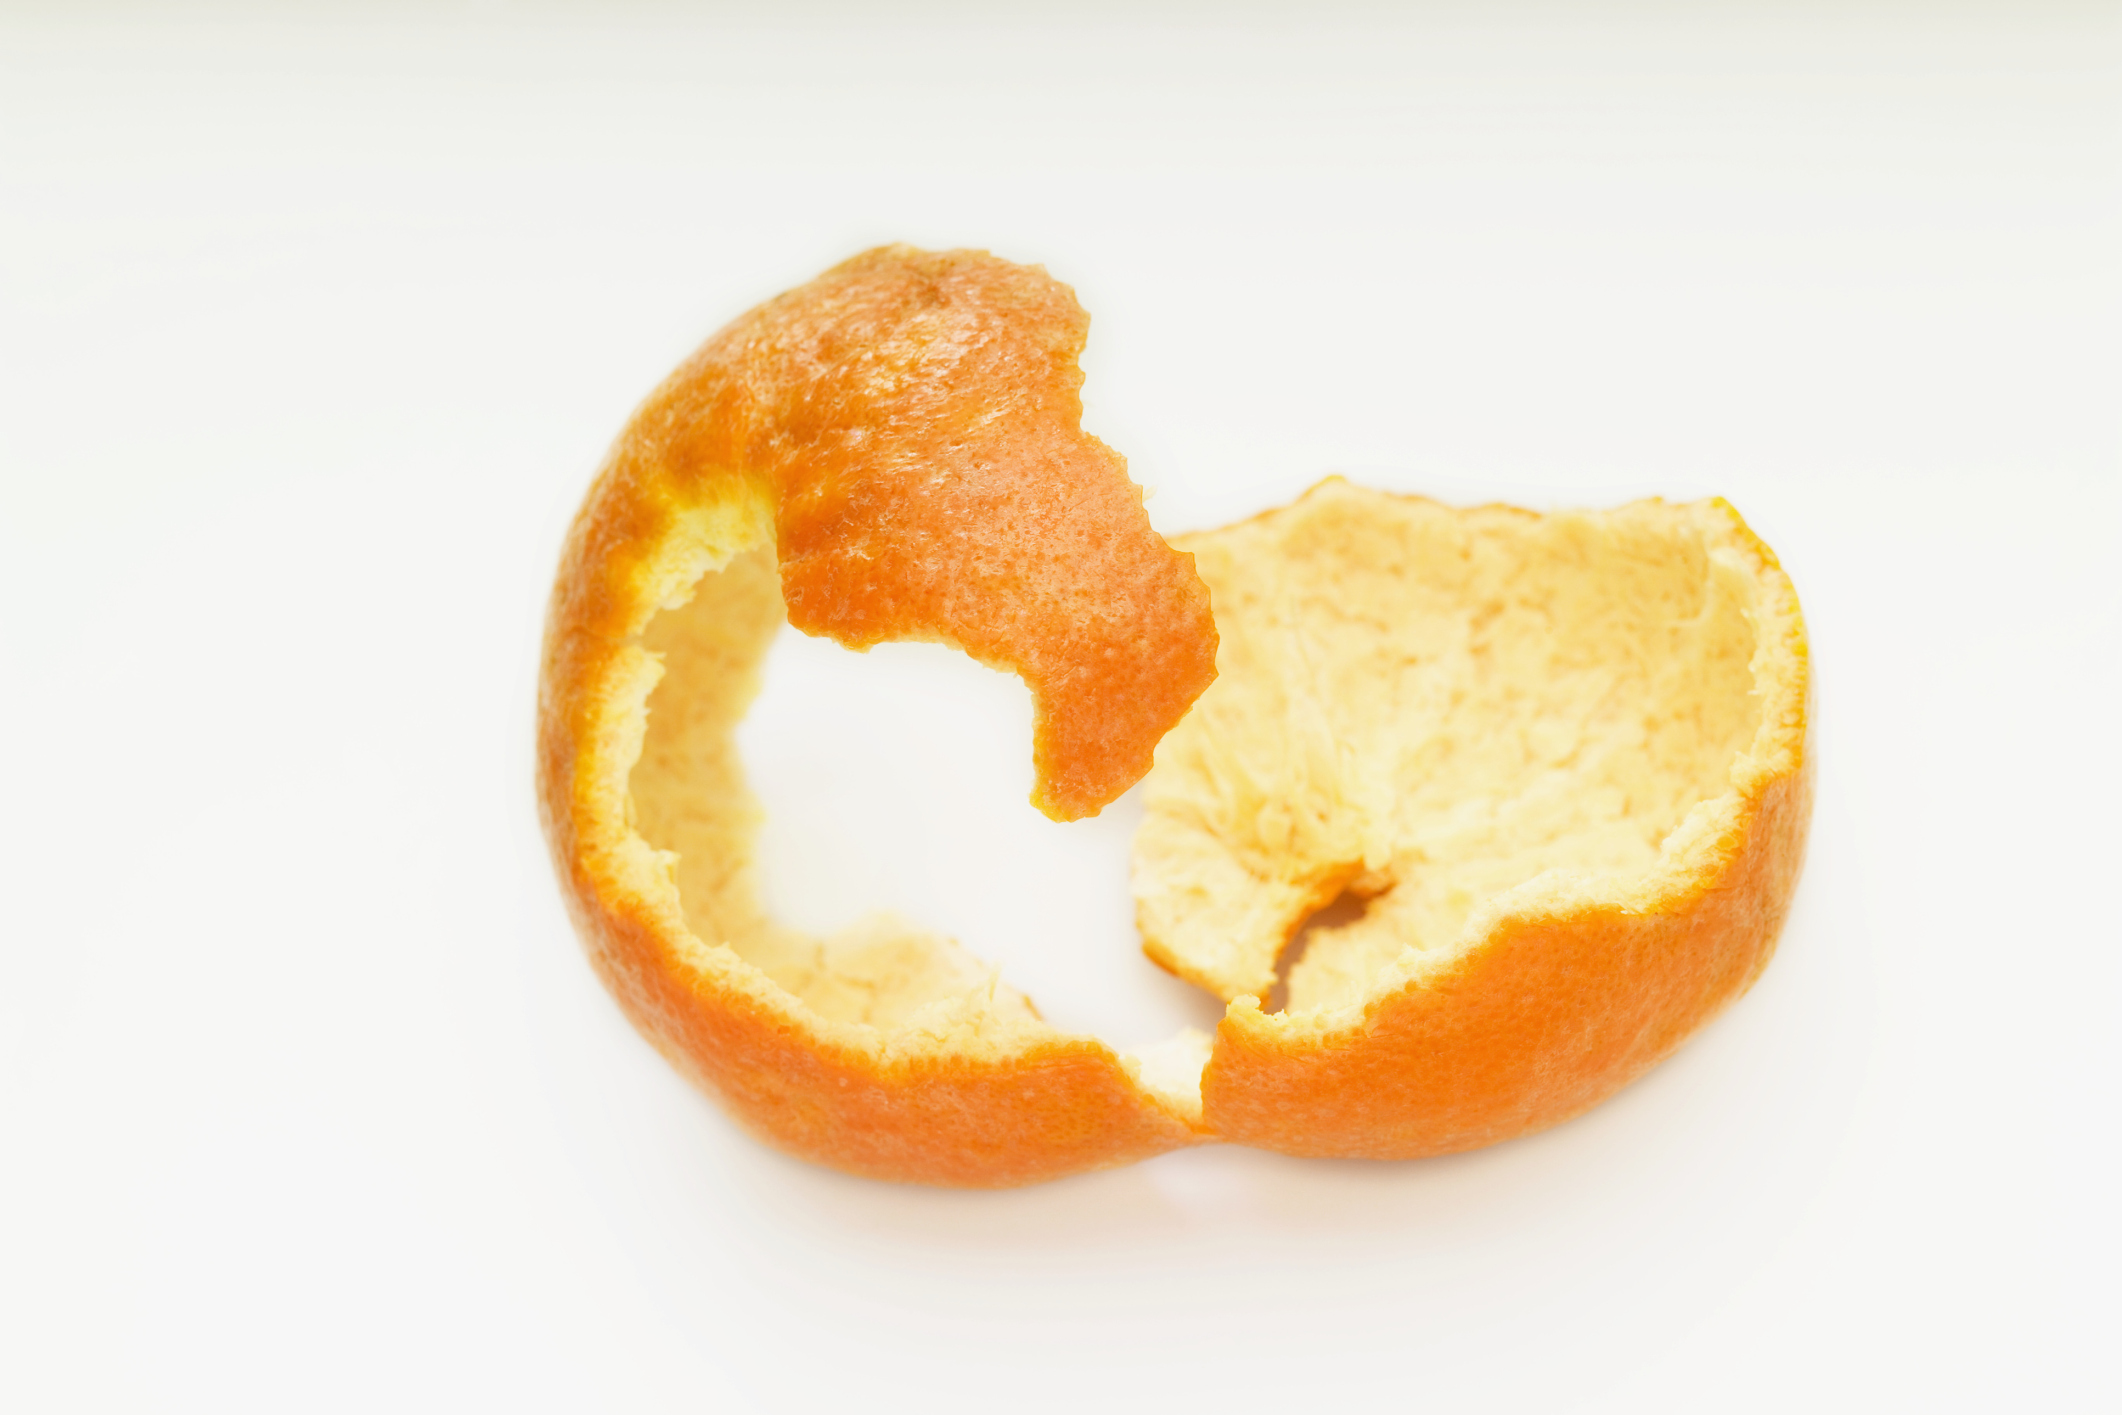 Is It Healthy to Eat Orange Peels? | LIVESTRONG.COM